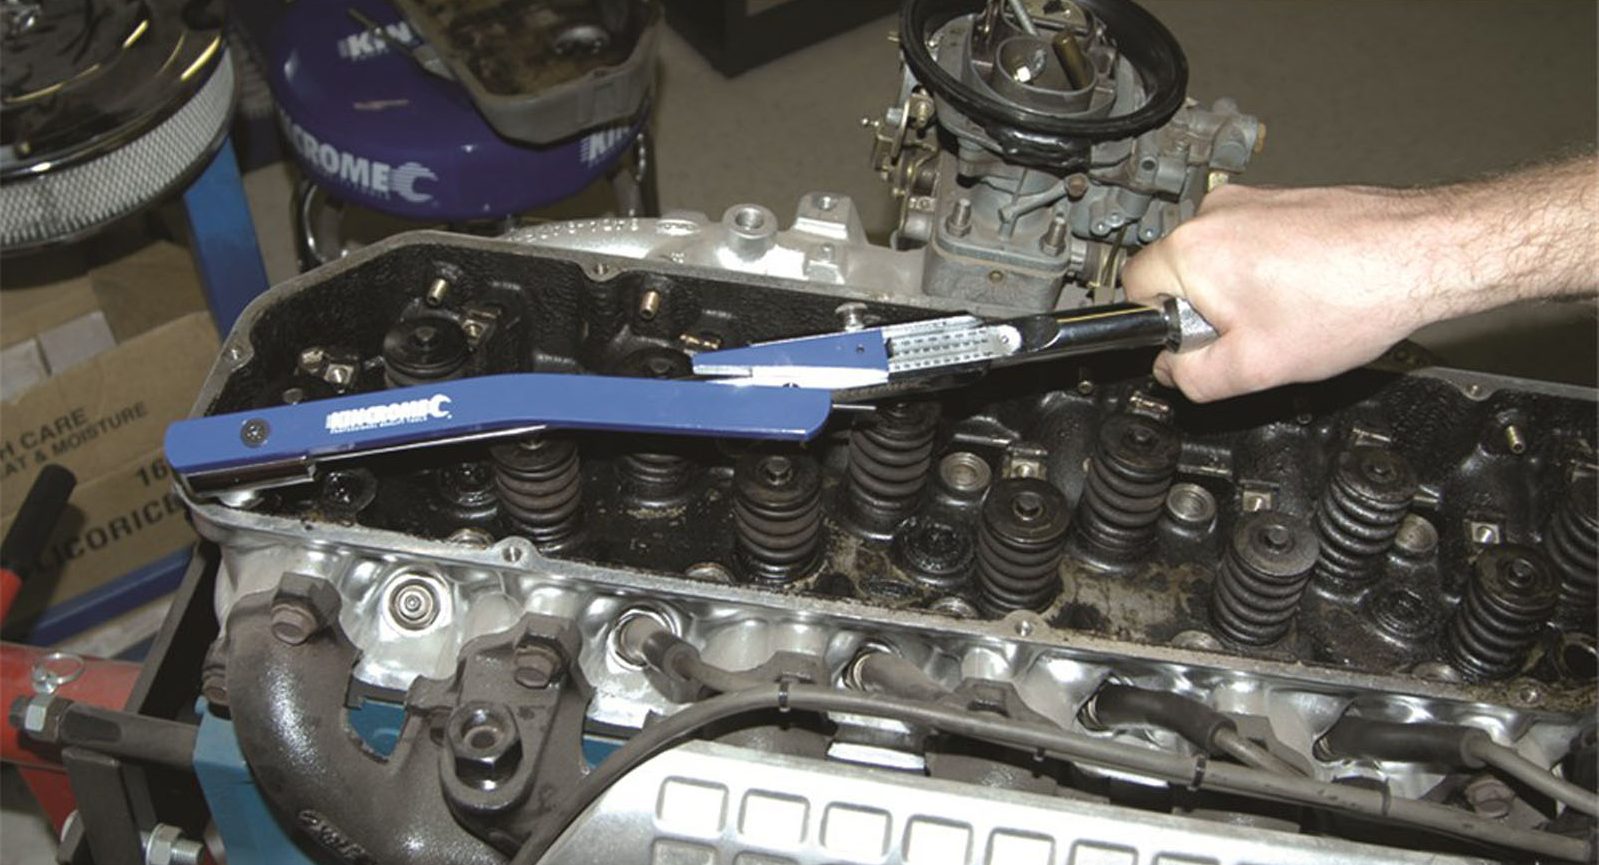 Common mistakes when using a Kincrome torque wrench